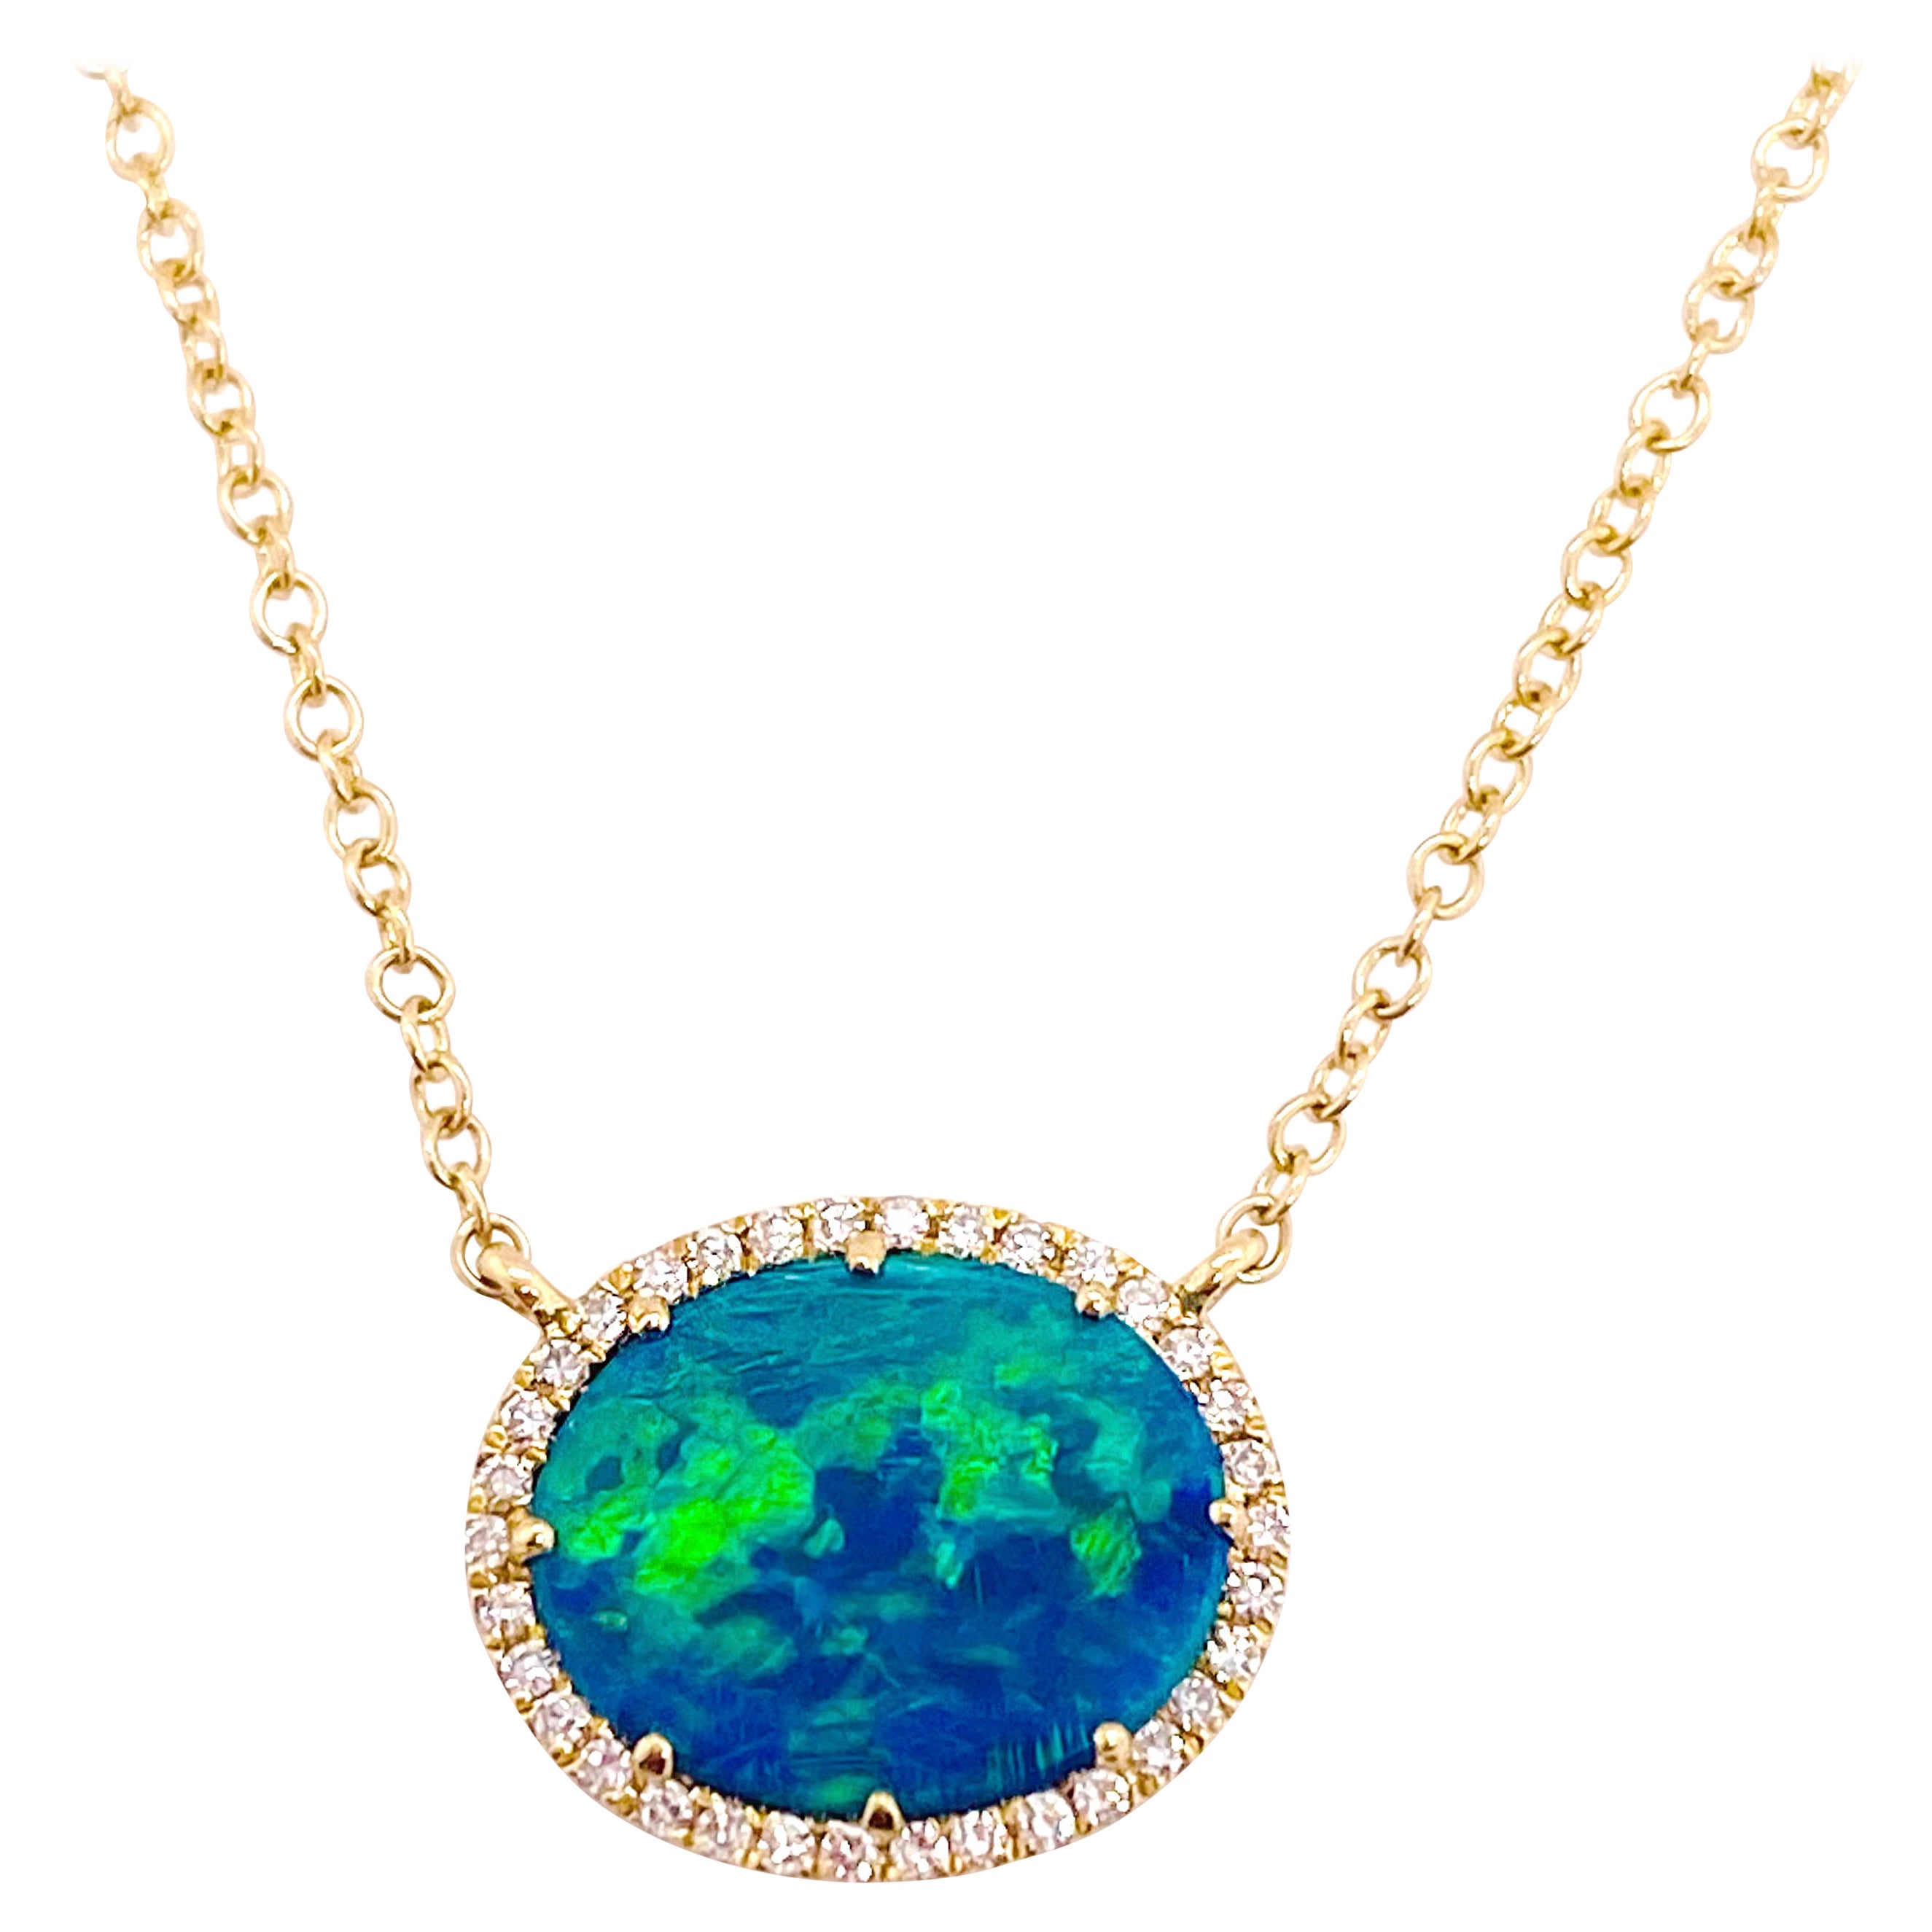 Opal Diamond Necklace, Yellow Gold, Genuine Opal and Diamond Halo Pendant .79 ct For Sale